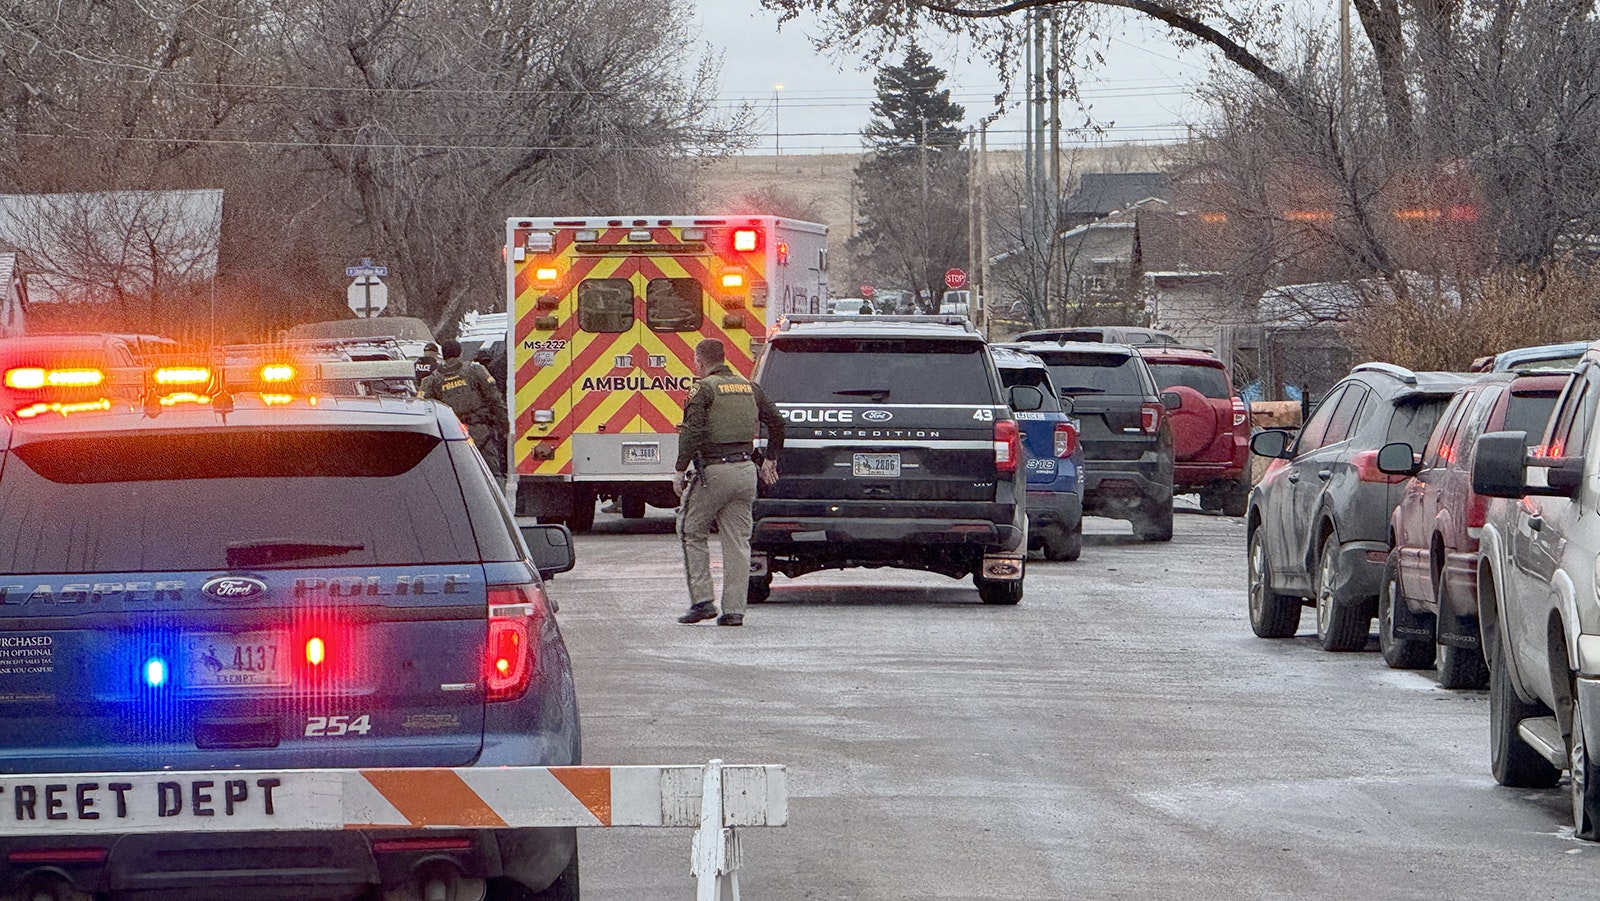 An ambulance pulls up to the house where an armed suspect was barricaded for more than 30 hours after a Sheridan police officer was shot and killed Tuesday.